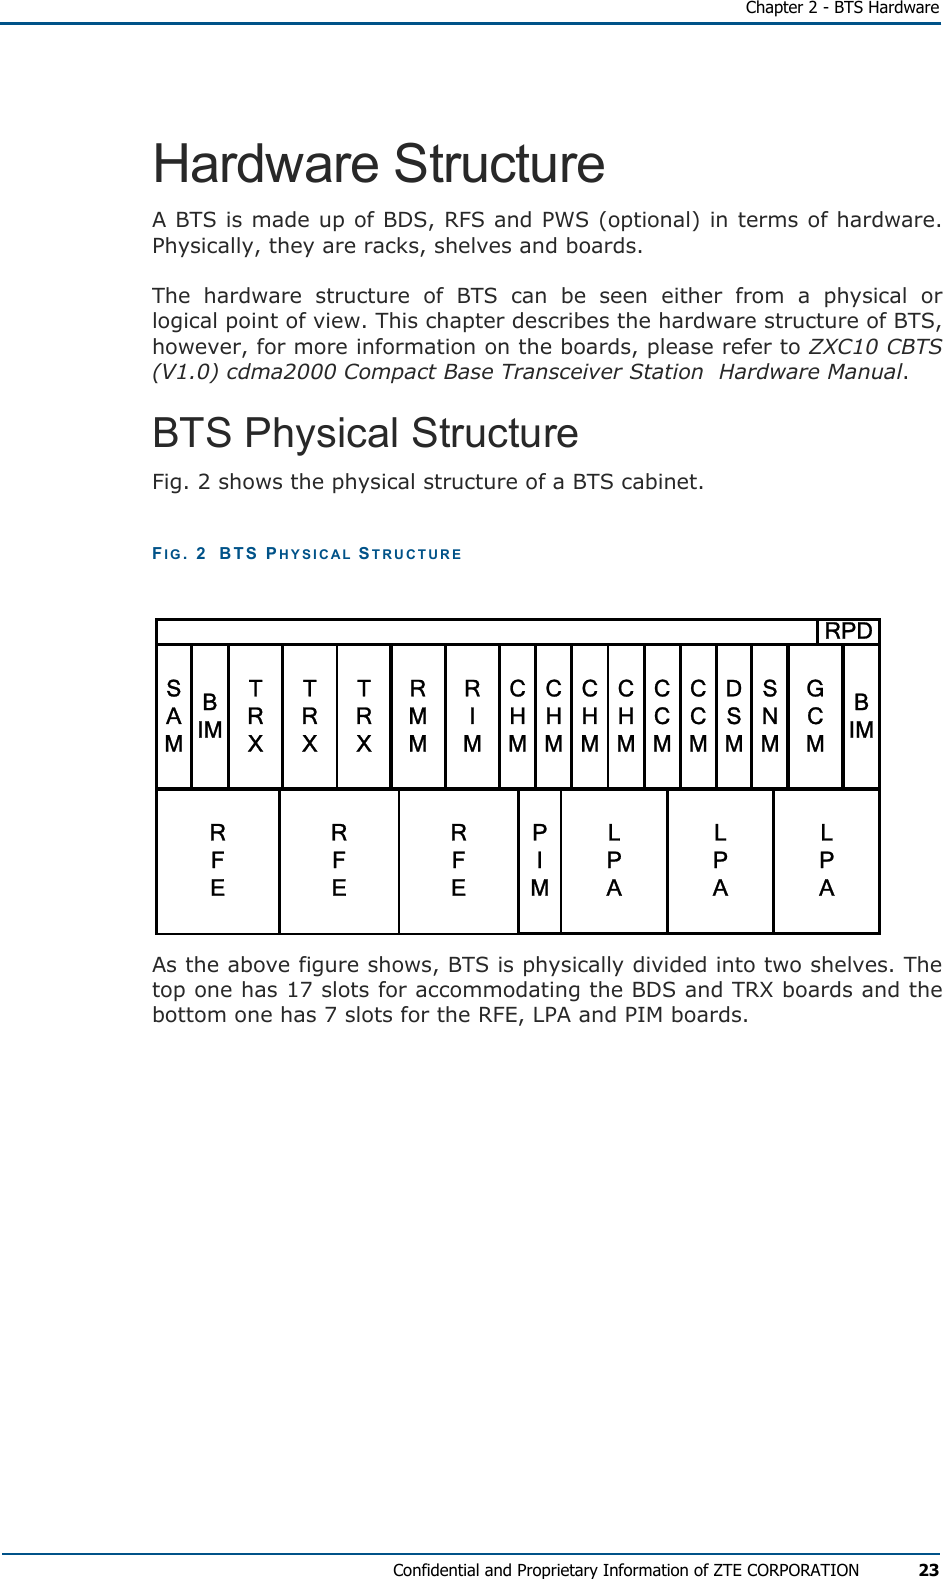   Chapter 2 - BTS Hardware Confidential and Proprietary Information of ZTE CORPORATION 23 Hardware Structure A BTS is made up of BDS, RFS and PWS (optional) in terms of hardware. Physically, they are racks, shelves and boards. The hardware structure of BTS can be seen either from a physical or logical point of view. This chapter describes the hardware structure of BTS, however, for more information on the boards, please refer to ZXC10 CBTS (V1.0) cdma2000 Compact Base Transceiver Station  Hardware Manual.  BTS Physical Structure Fig. 2 shows the physical structure of a BTS cabinet. FIG. 2  BTS PHYSICAL STRUCTURE CHMCHMCHMCHMTRXTRXTRXRMMRIMRPDSAMCCMCCMDSMGCMLPAPIMLPALPARFERFERFEBIMSNMBIM As the above figure shows, BTS is physically divided into two shelves. The top one has 17 slots for accommodating the BDS and TRX boards and the bottom one has 7 slots for the RFE, LPA and PIM boards.  